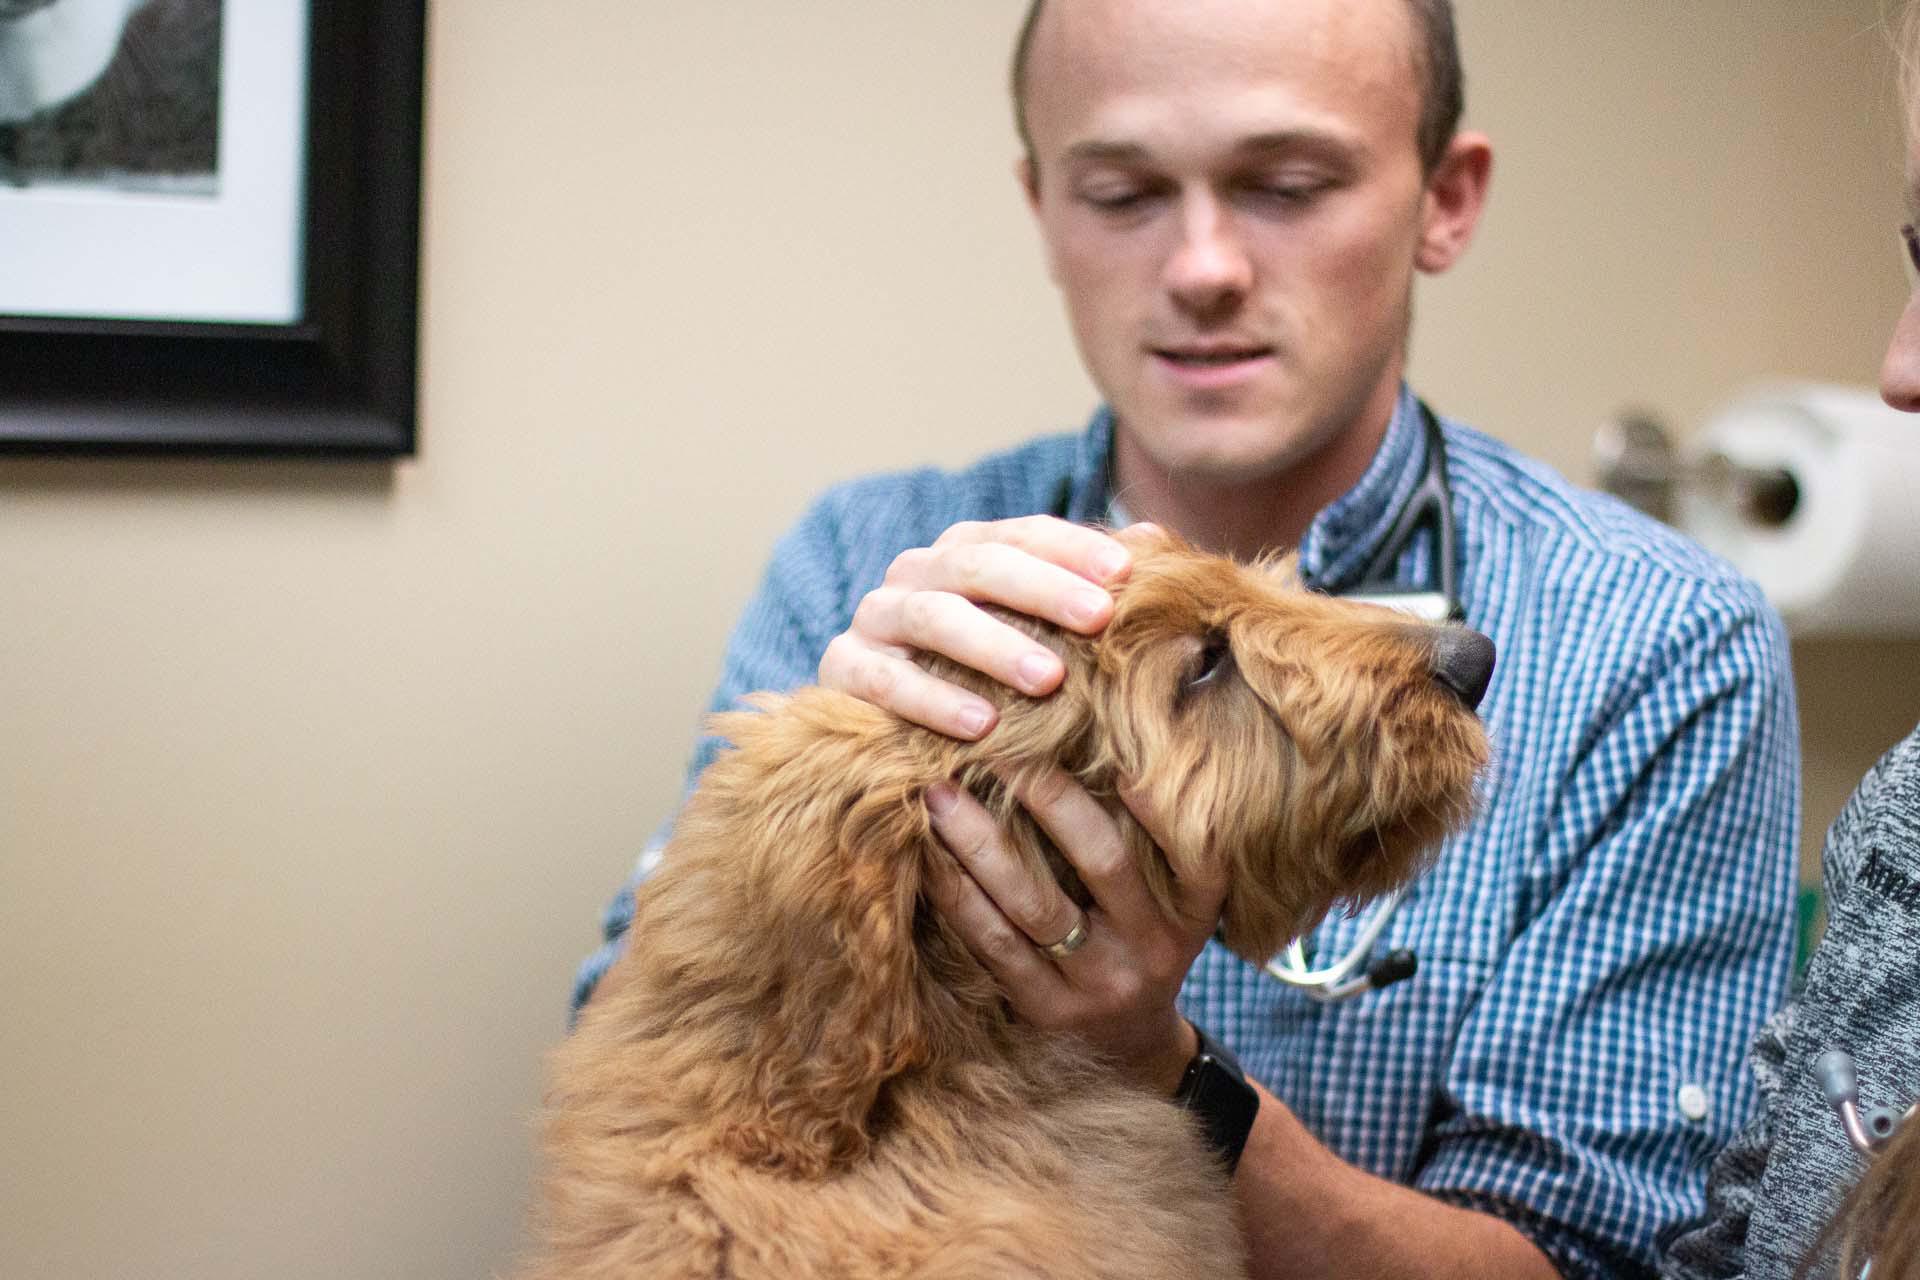 This pup did great for his physical exam with Dr. Ben Lamp!